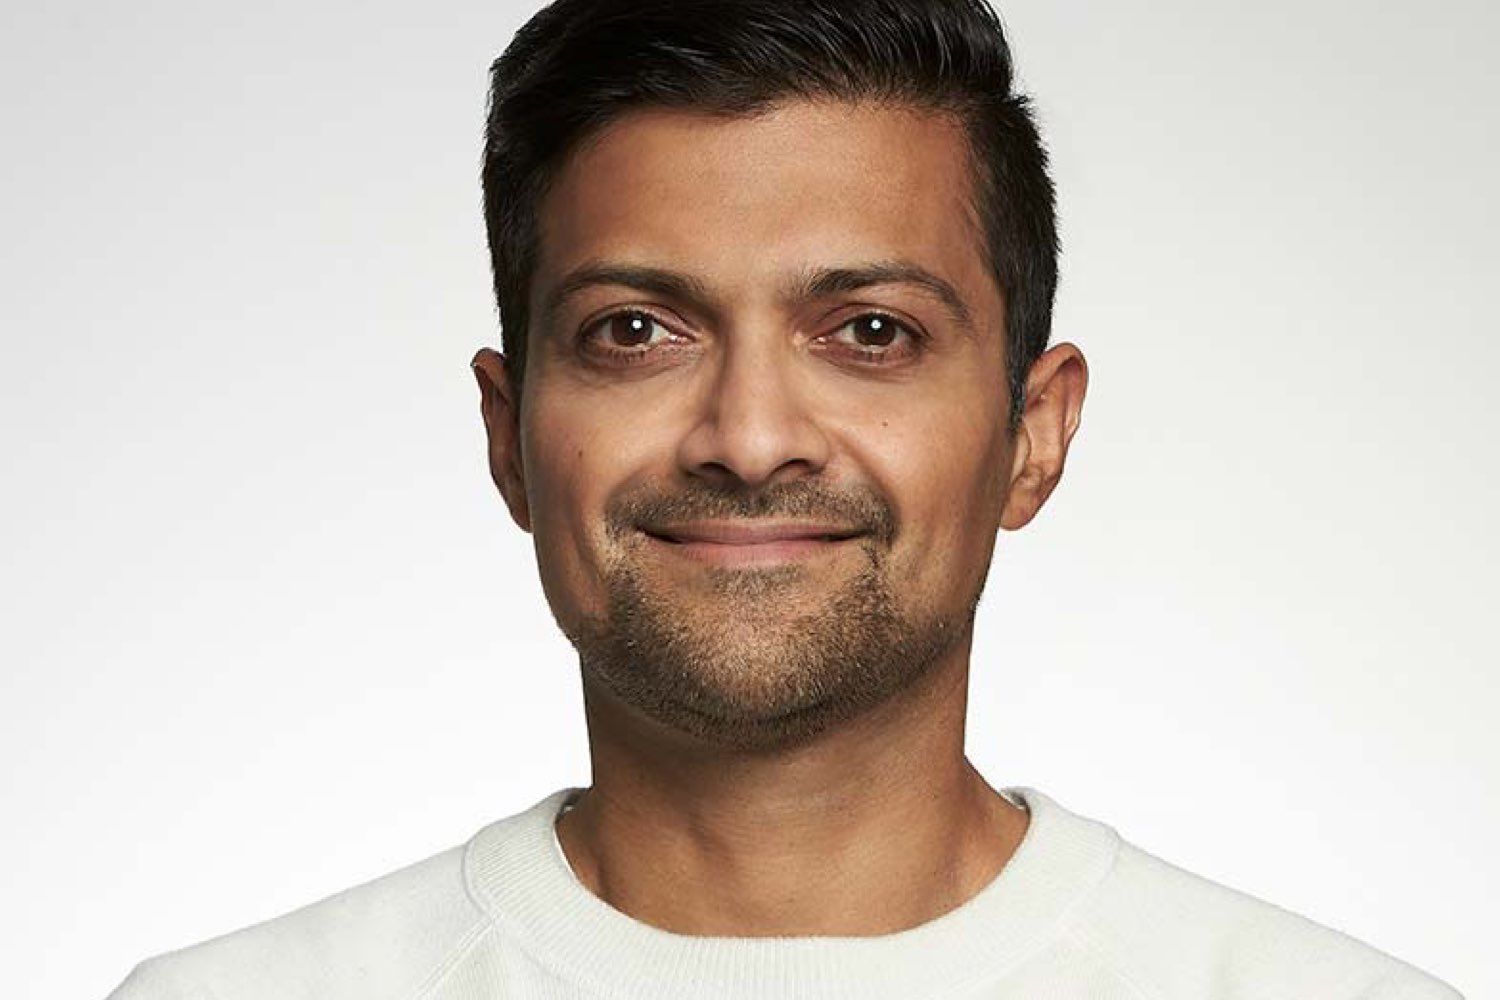 Why Mamoon Hamid joined Kleiner Perkins and what he thinks of direct listings